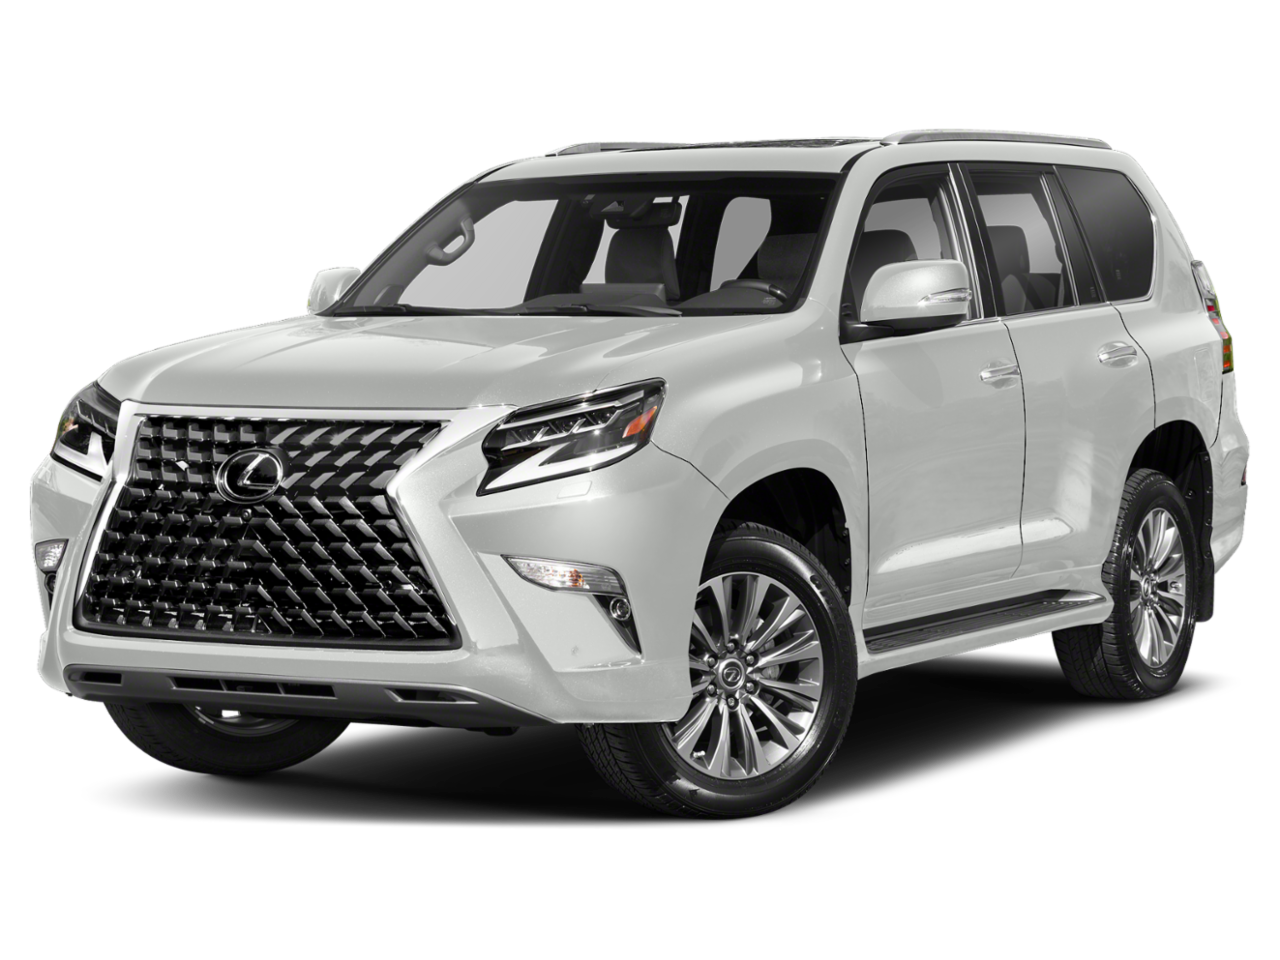 Sewell Lexus - Experience Lexus at Sewell Automotive Companies